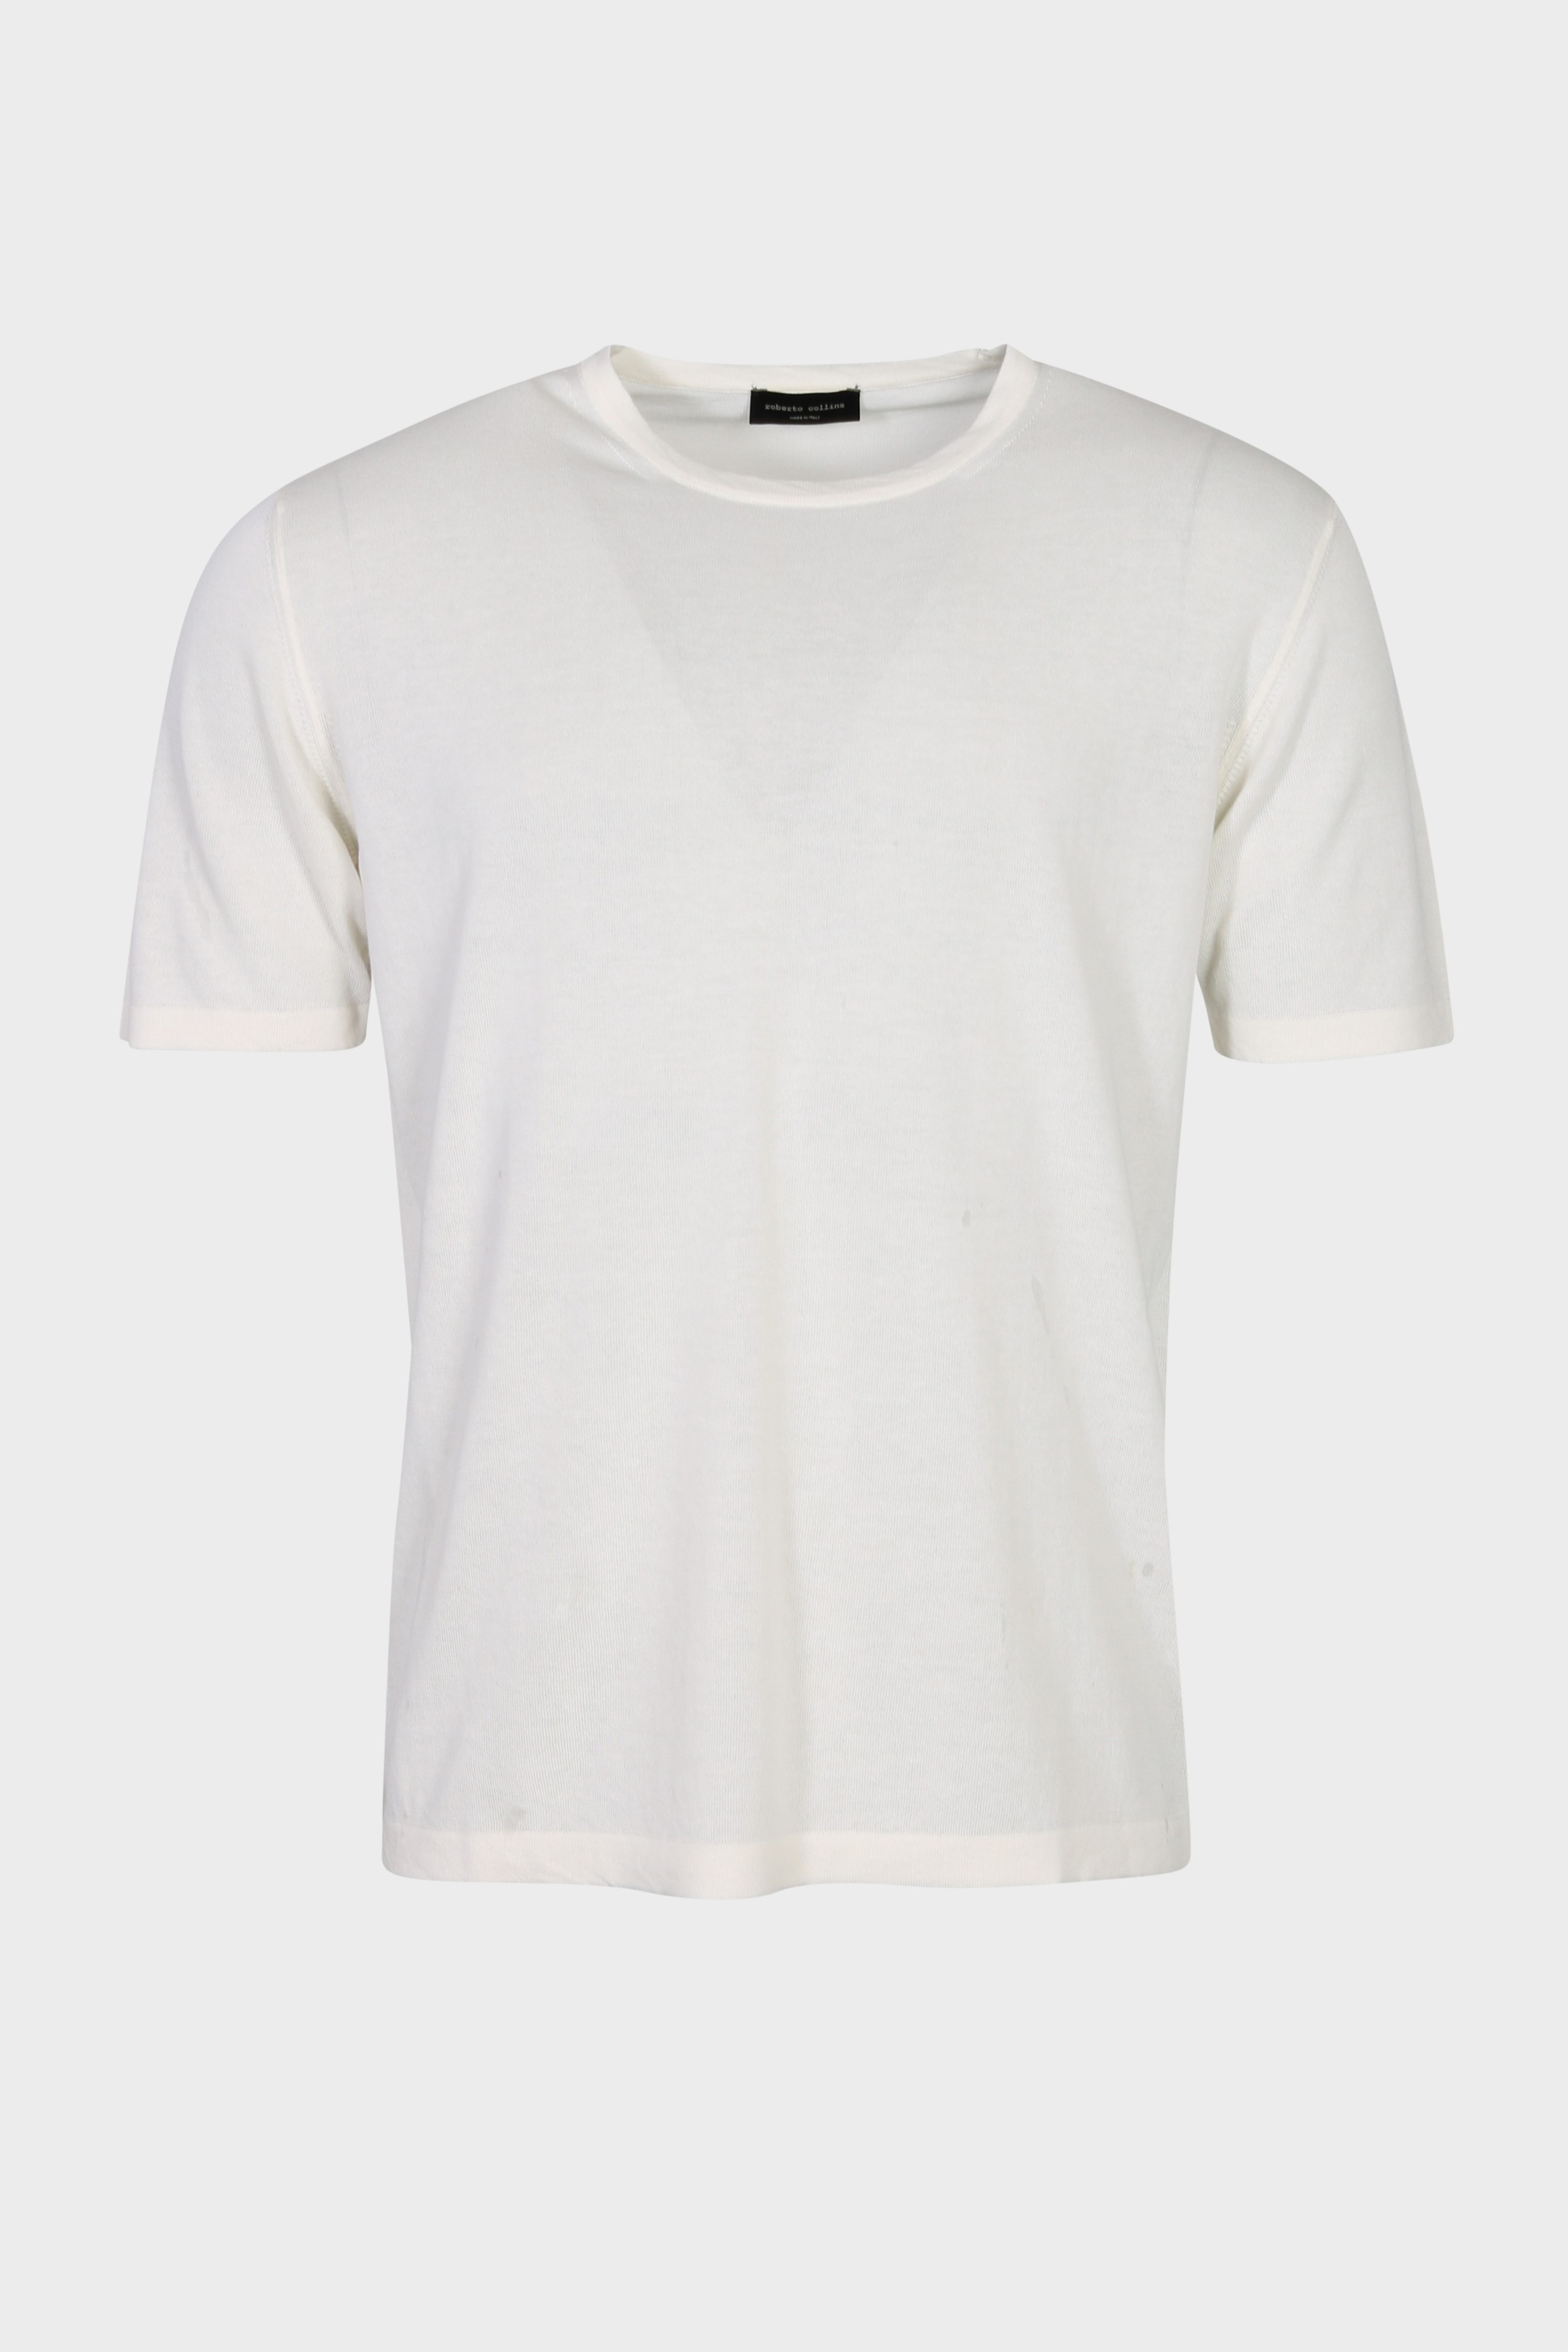 ROBERTO COLLINA Cotton Knit T-Shirt in Offwhite